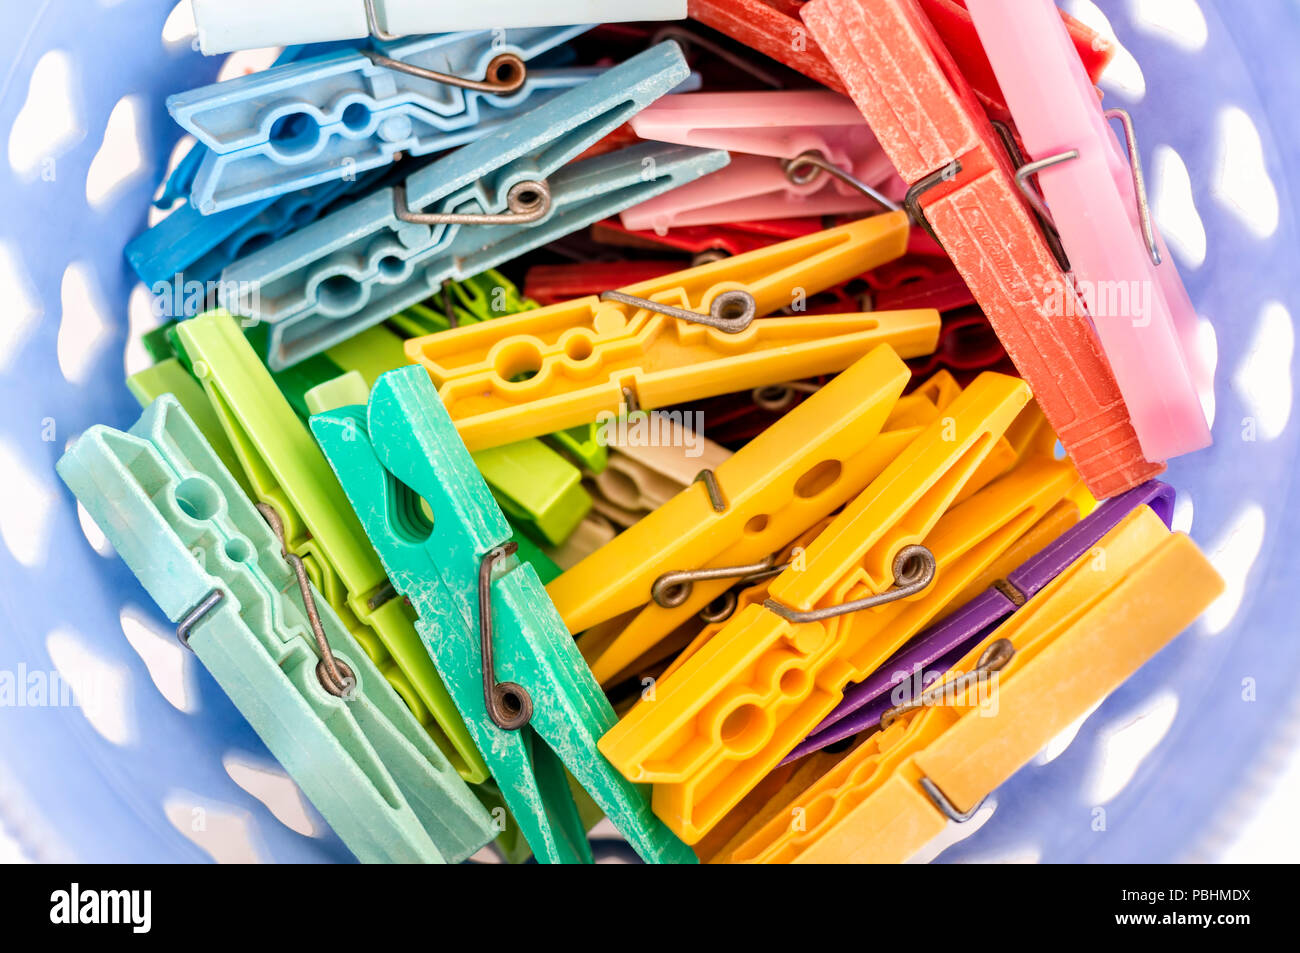 Laundry Basket Filled With Colorful Clothes Pegs Stock Photo